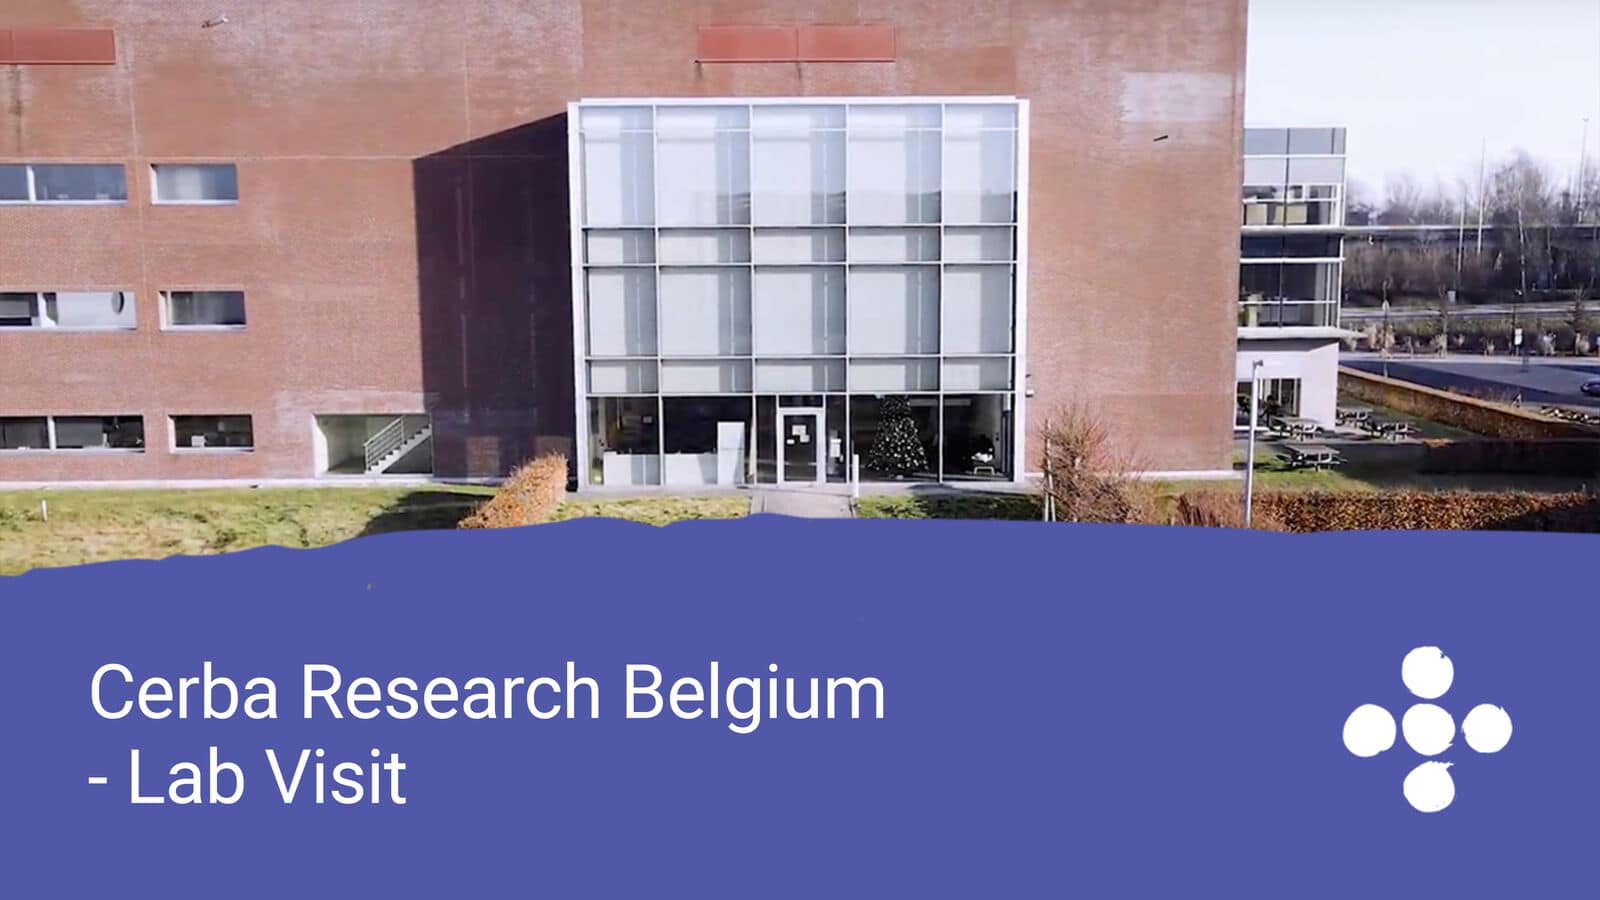 Cerba Research takes you on a 360 degree tour of their research lab in Belgium